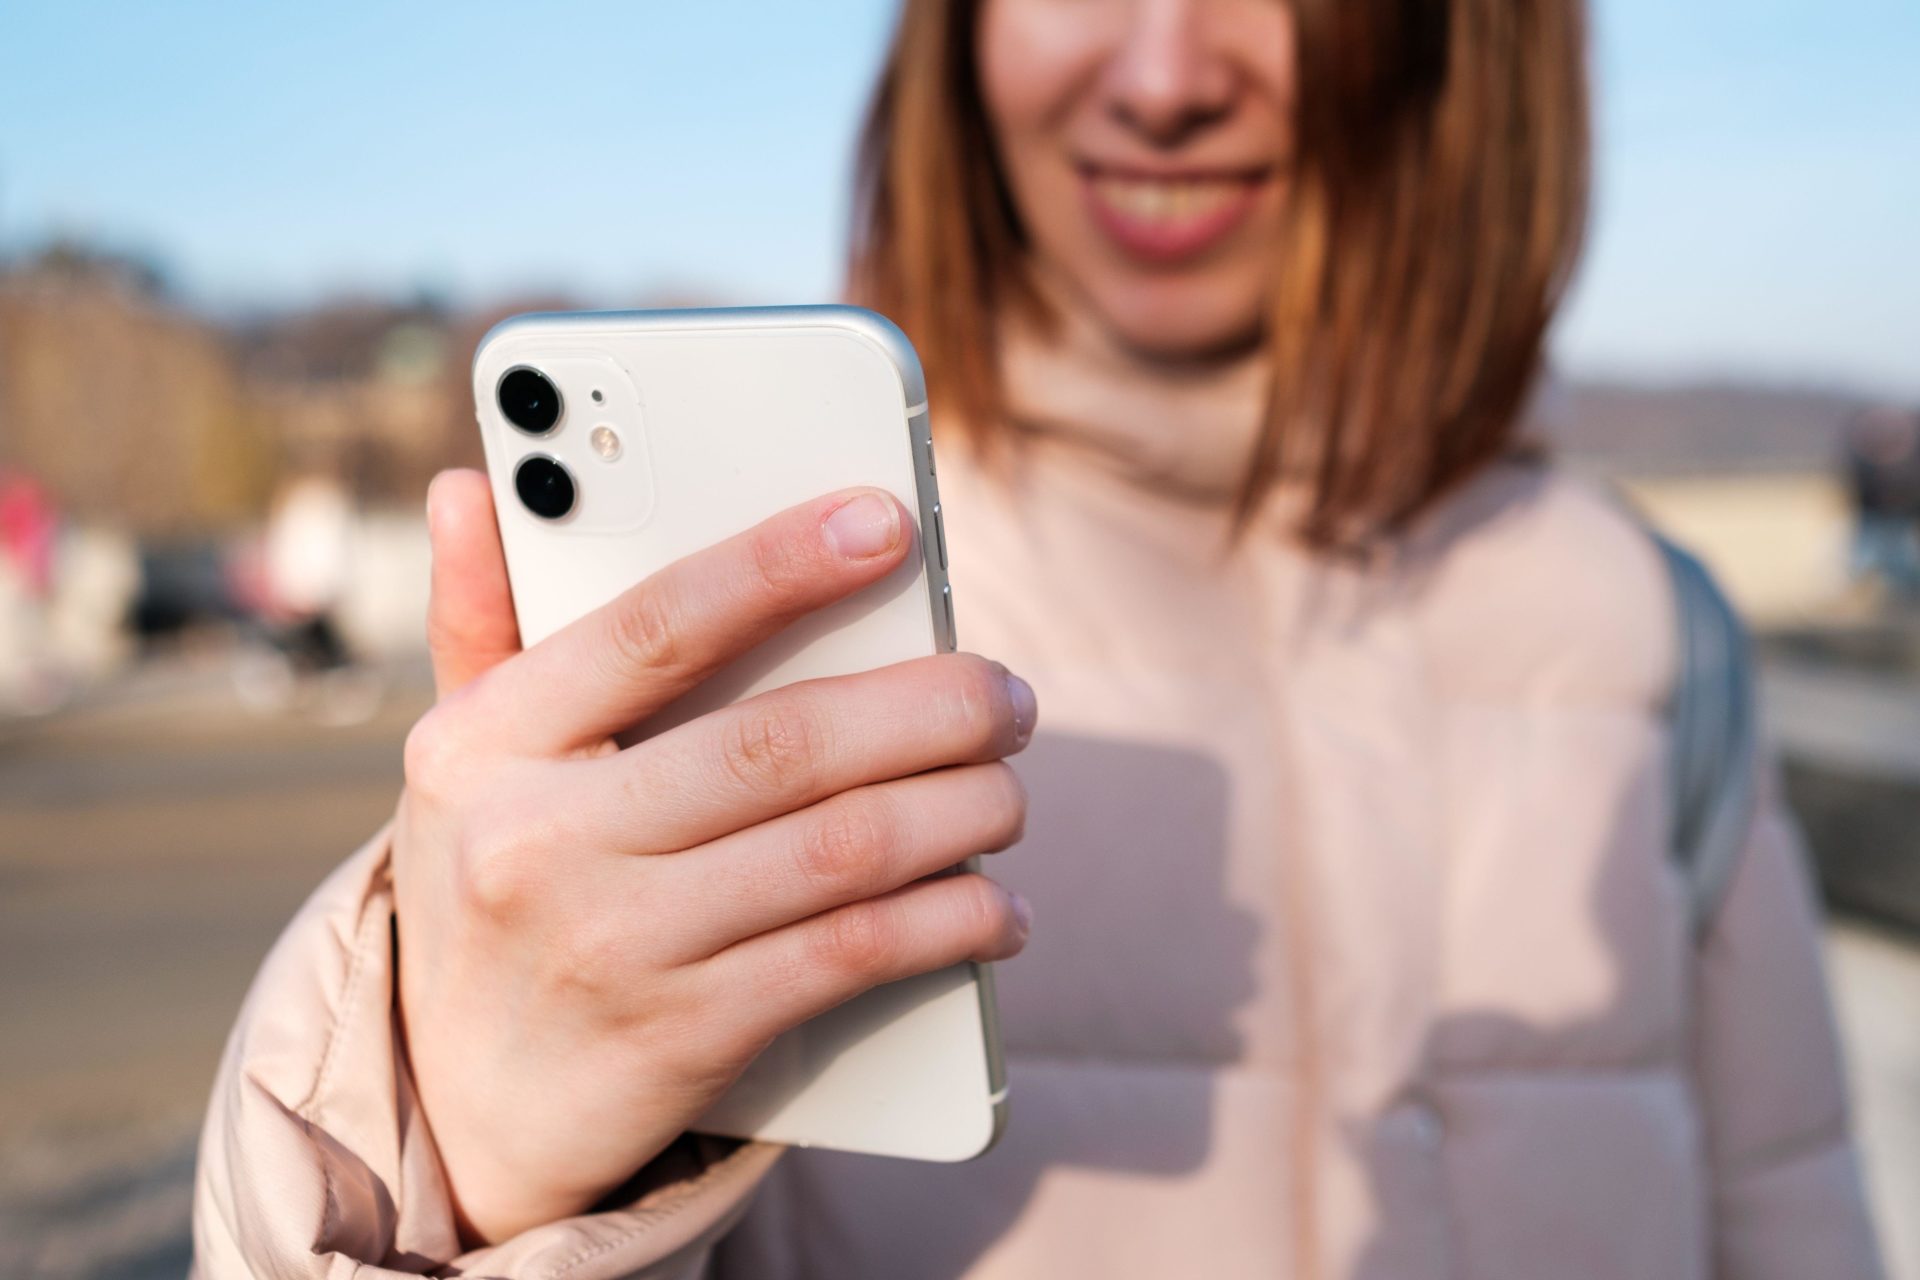 A woman recording a video on her smartphone